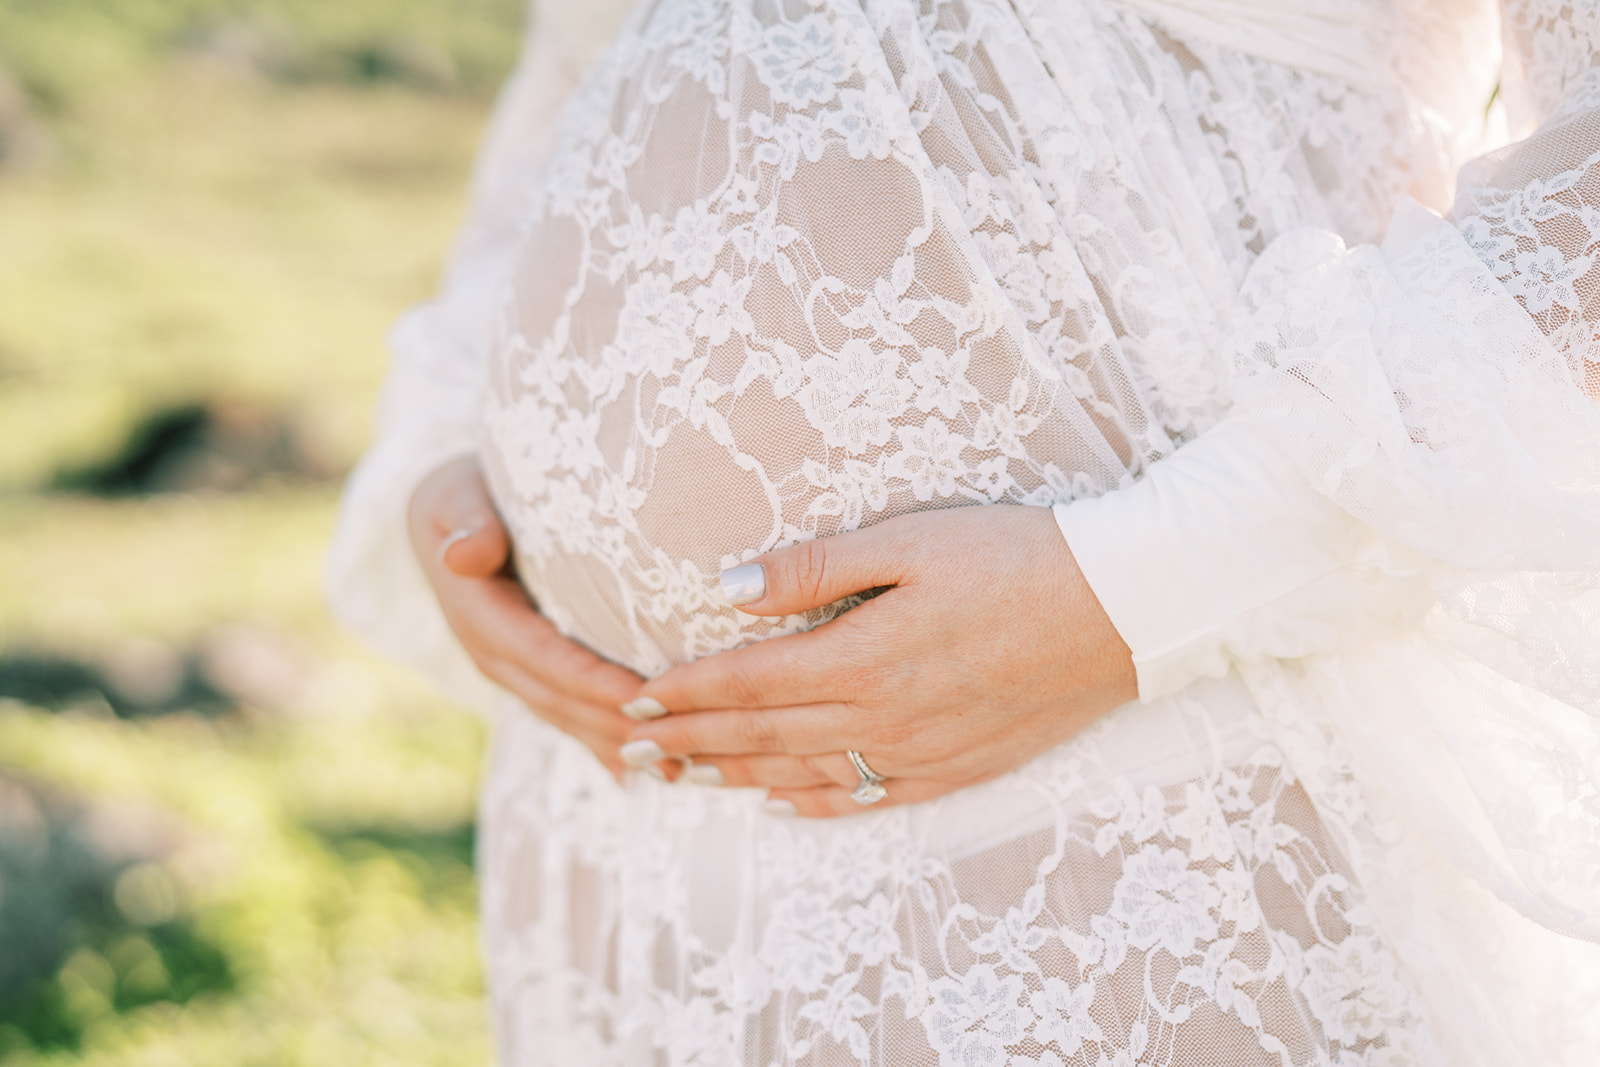 Pregnant woman in a beautiful maternity outfit holding her belly tenderly outdoors.